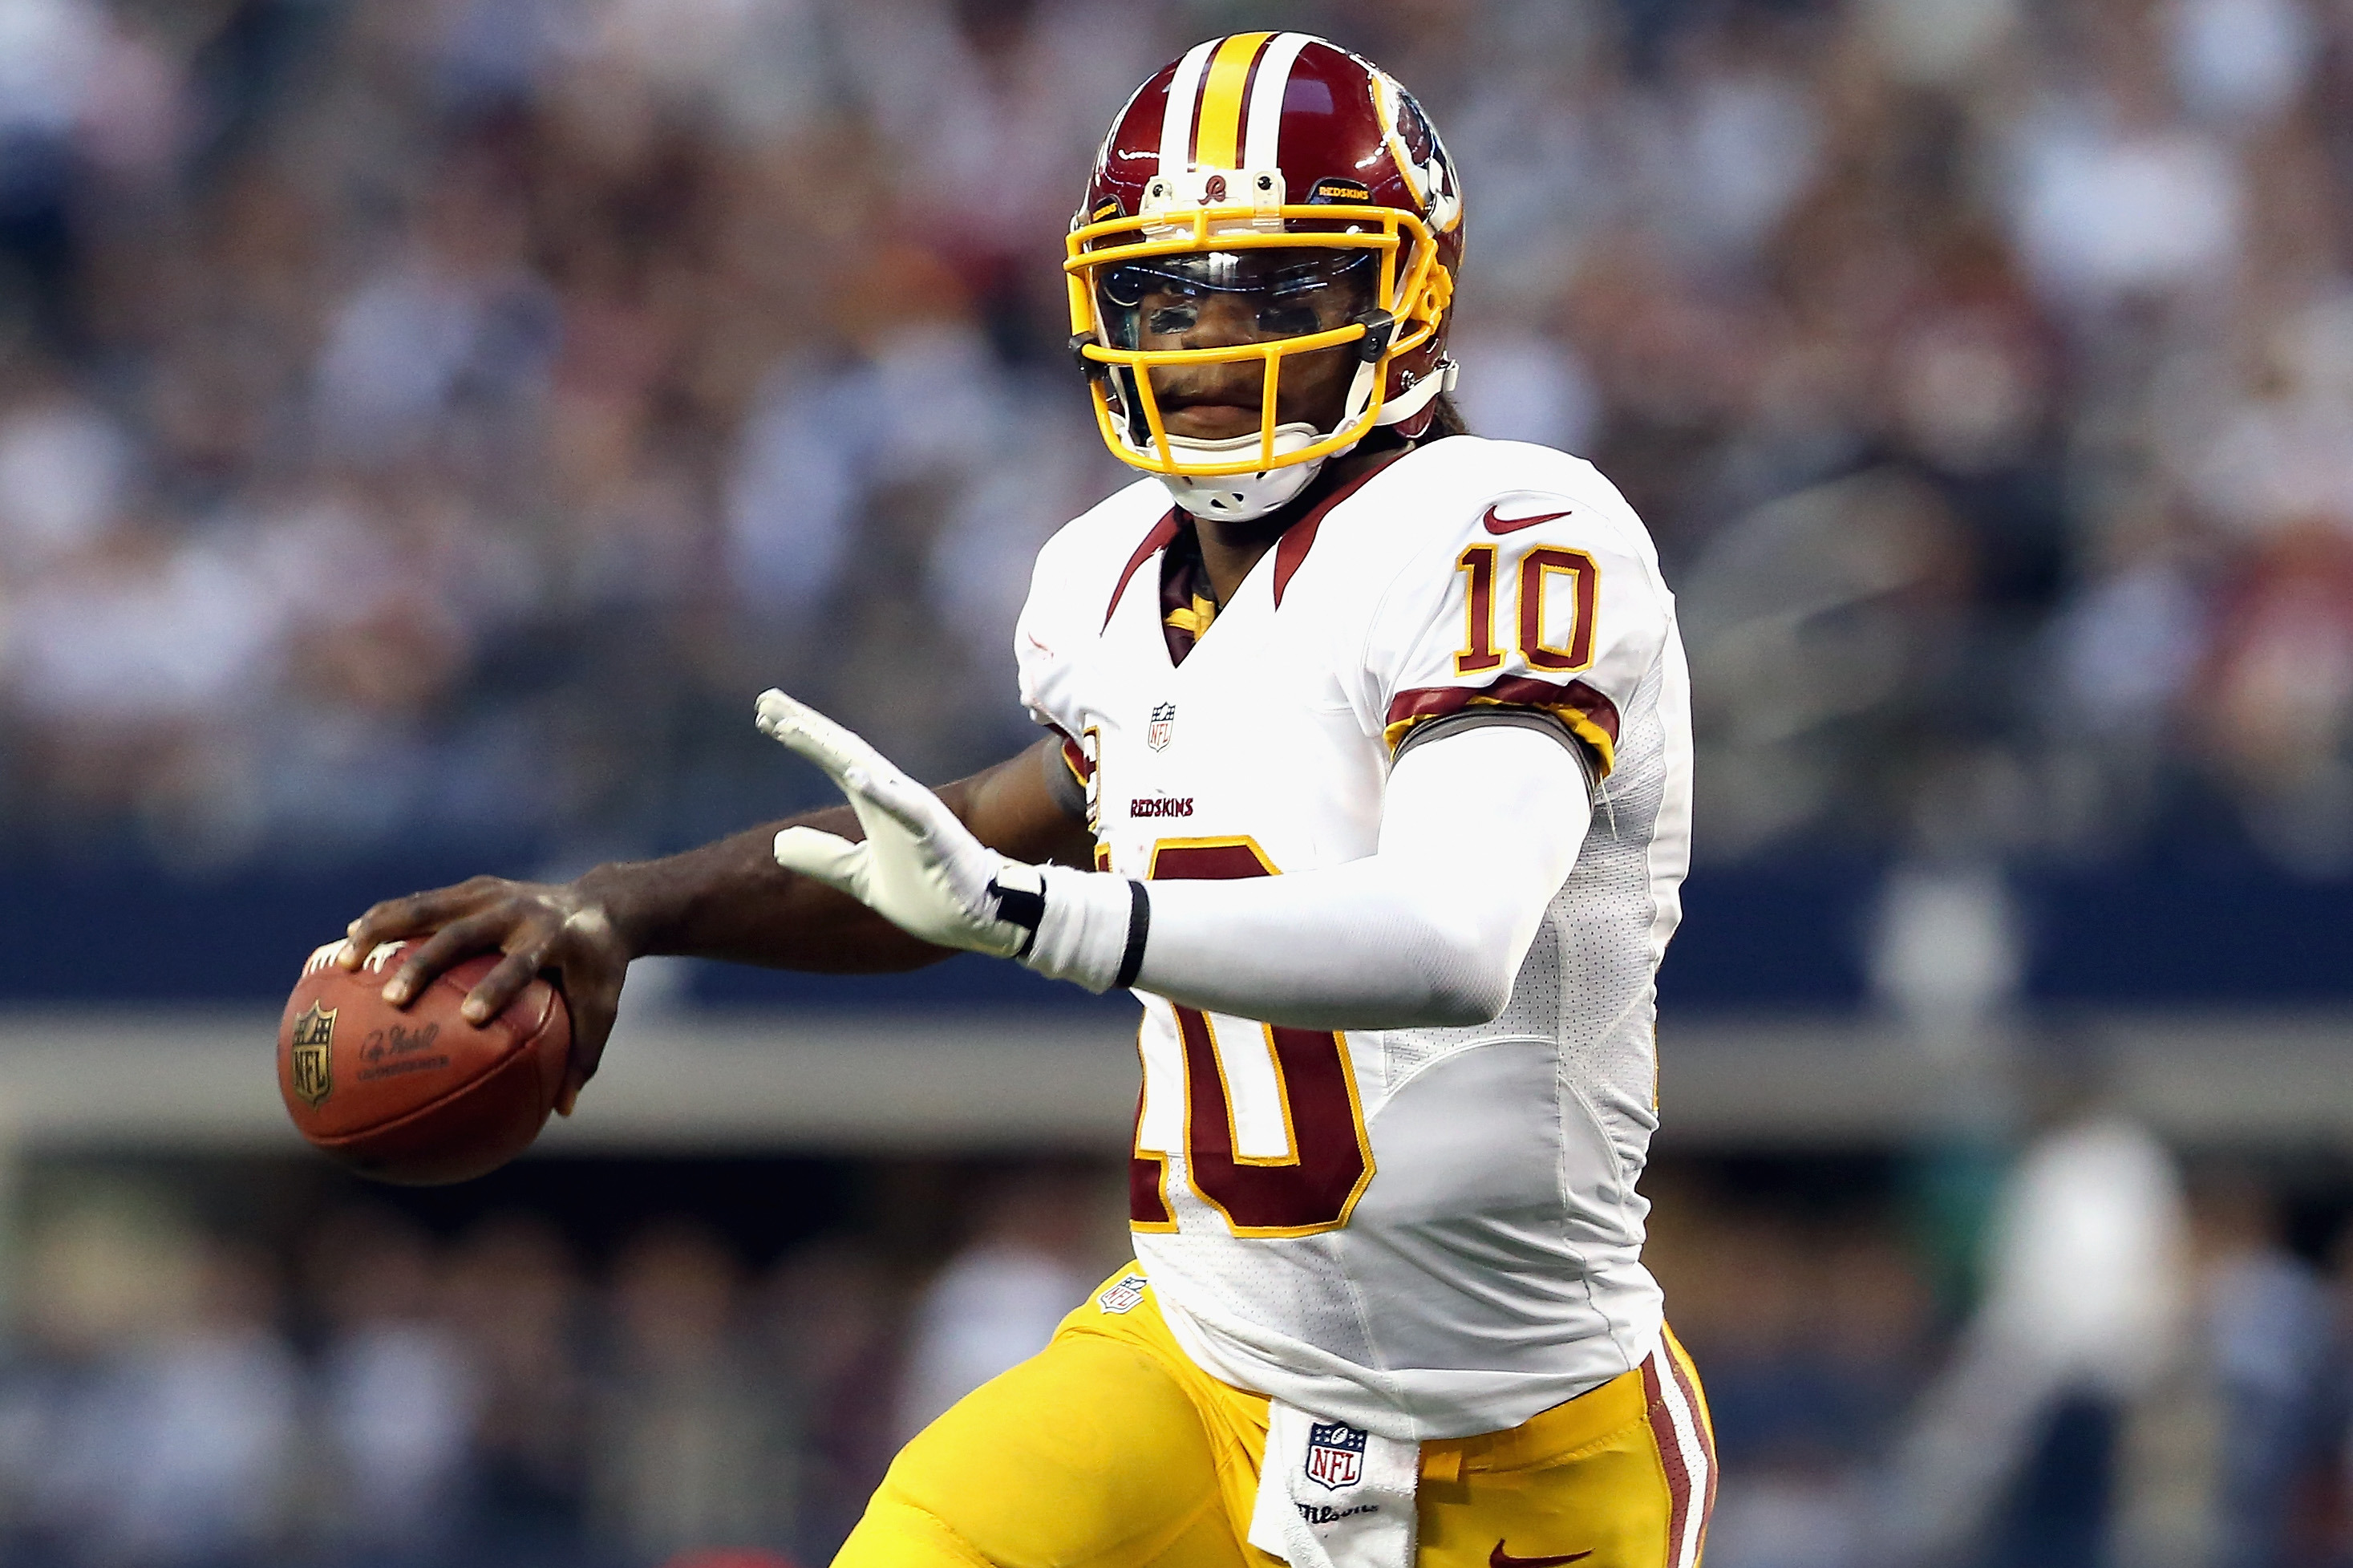 Washington's Robert Griffin III attempts a pass during a NFL Thanksgiving game against the Dallas Cowboys.